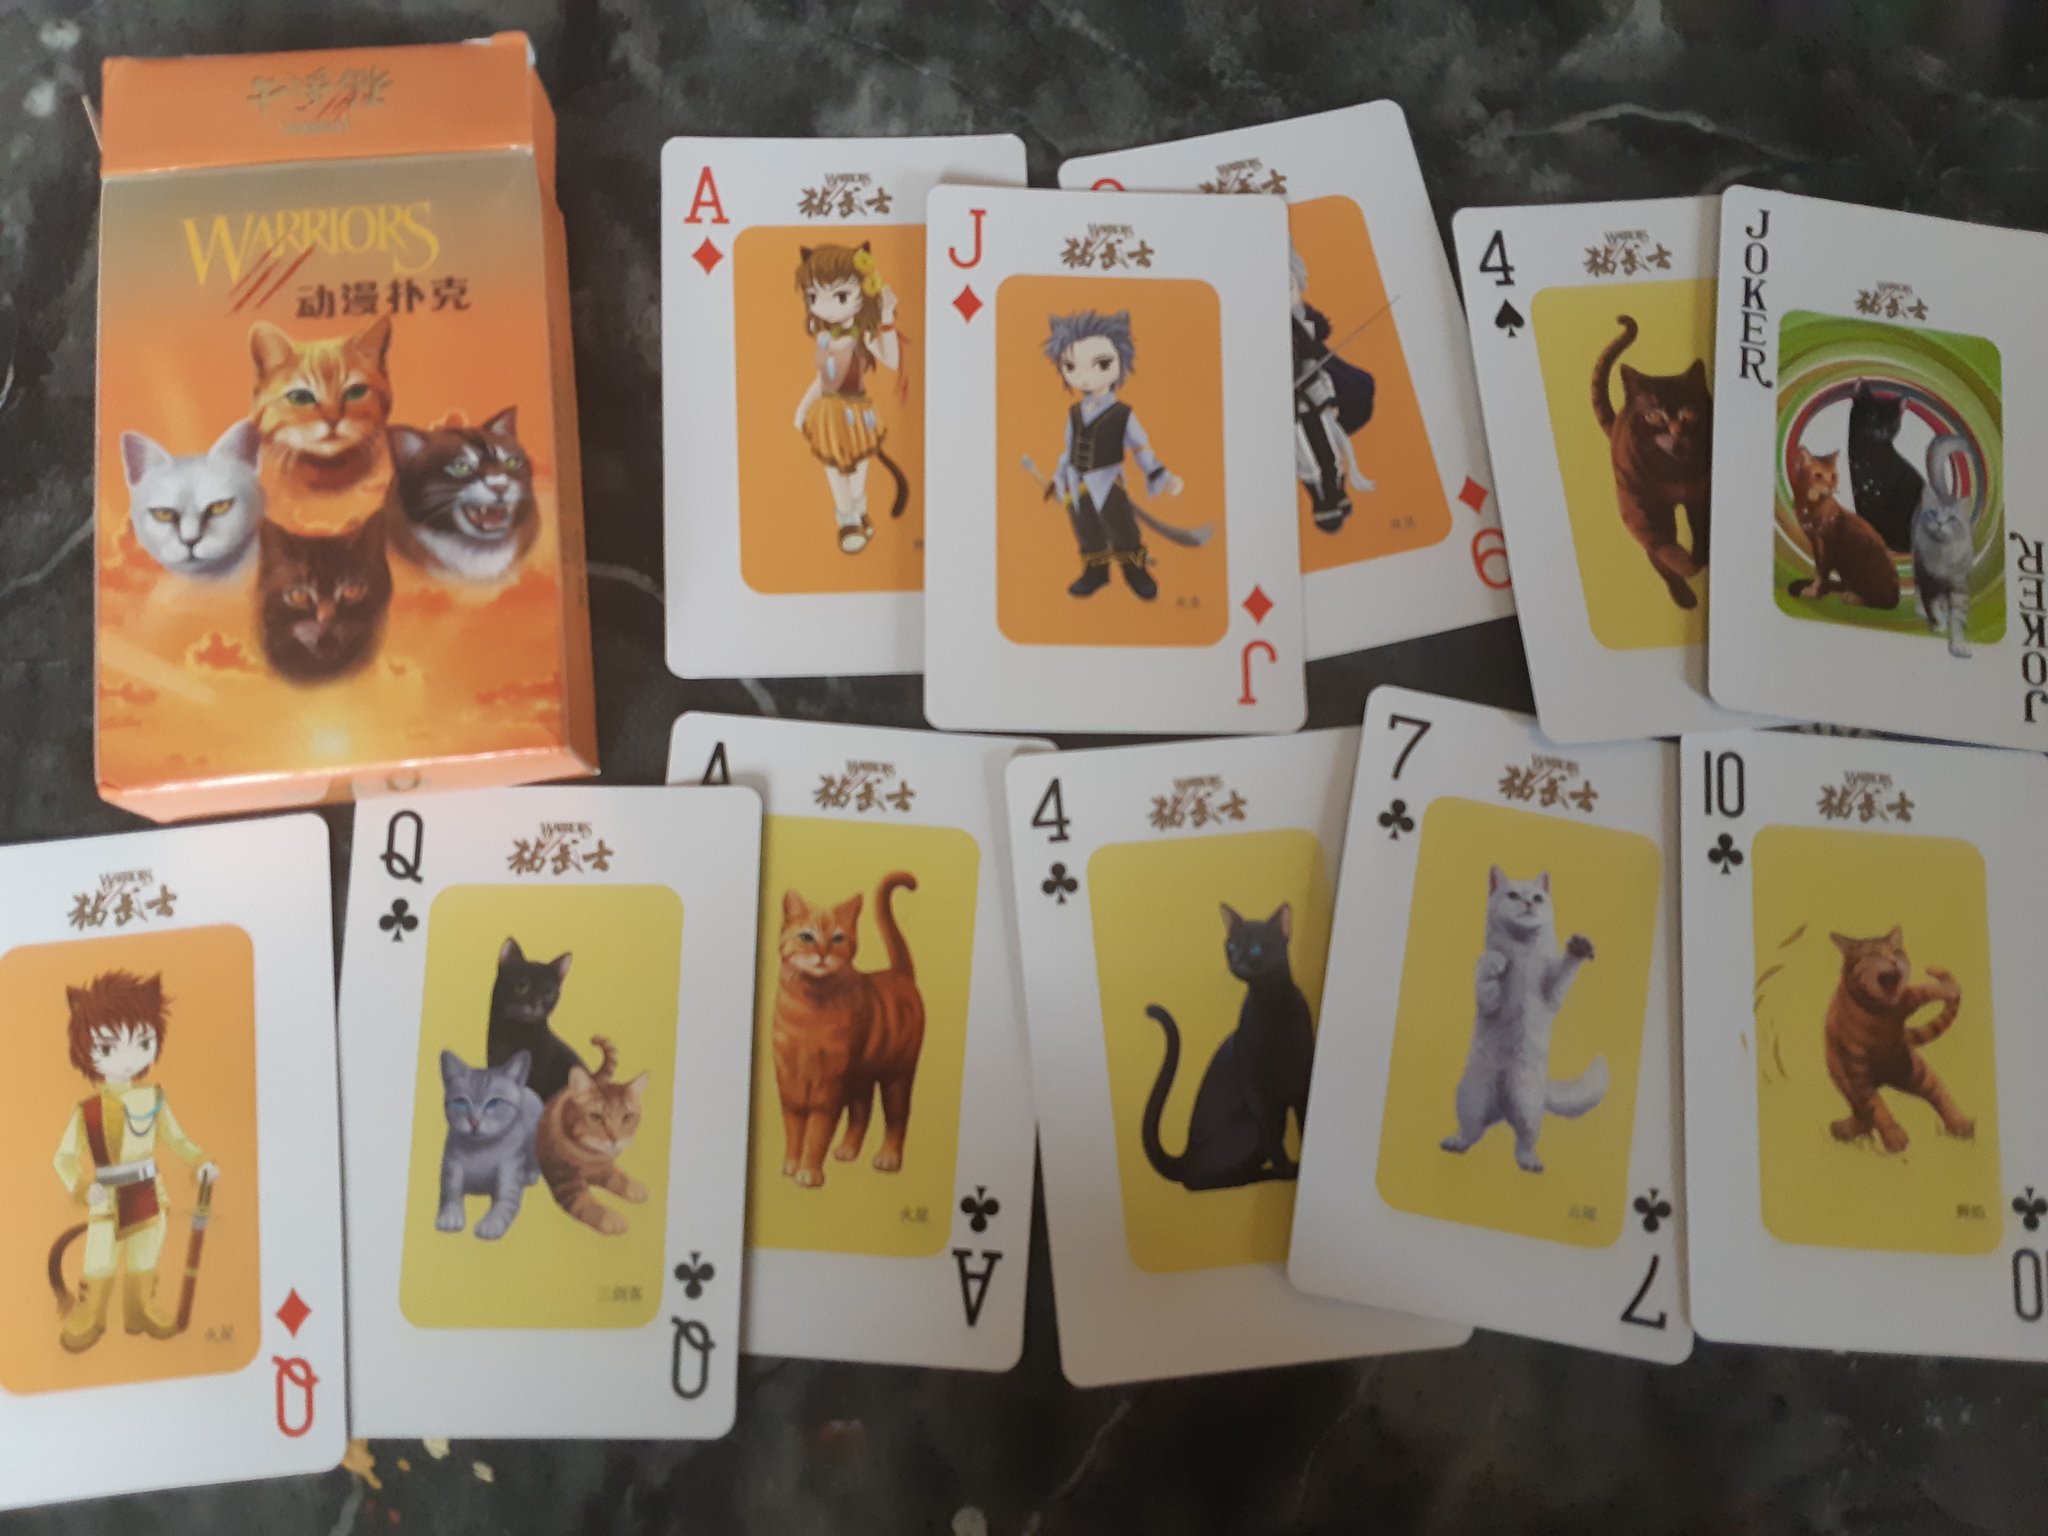 Dawnmist (HOLIDAY COMMISSIONS) on X: Behold, the deck of Chinese Warriors  playing cards! There are cats and anime human versions. Here's a thread of  every card  / X